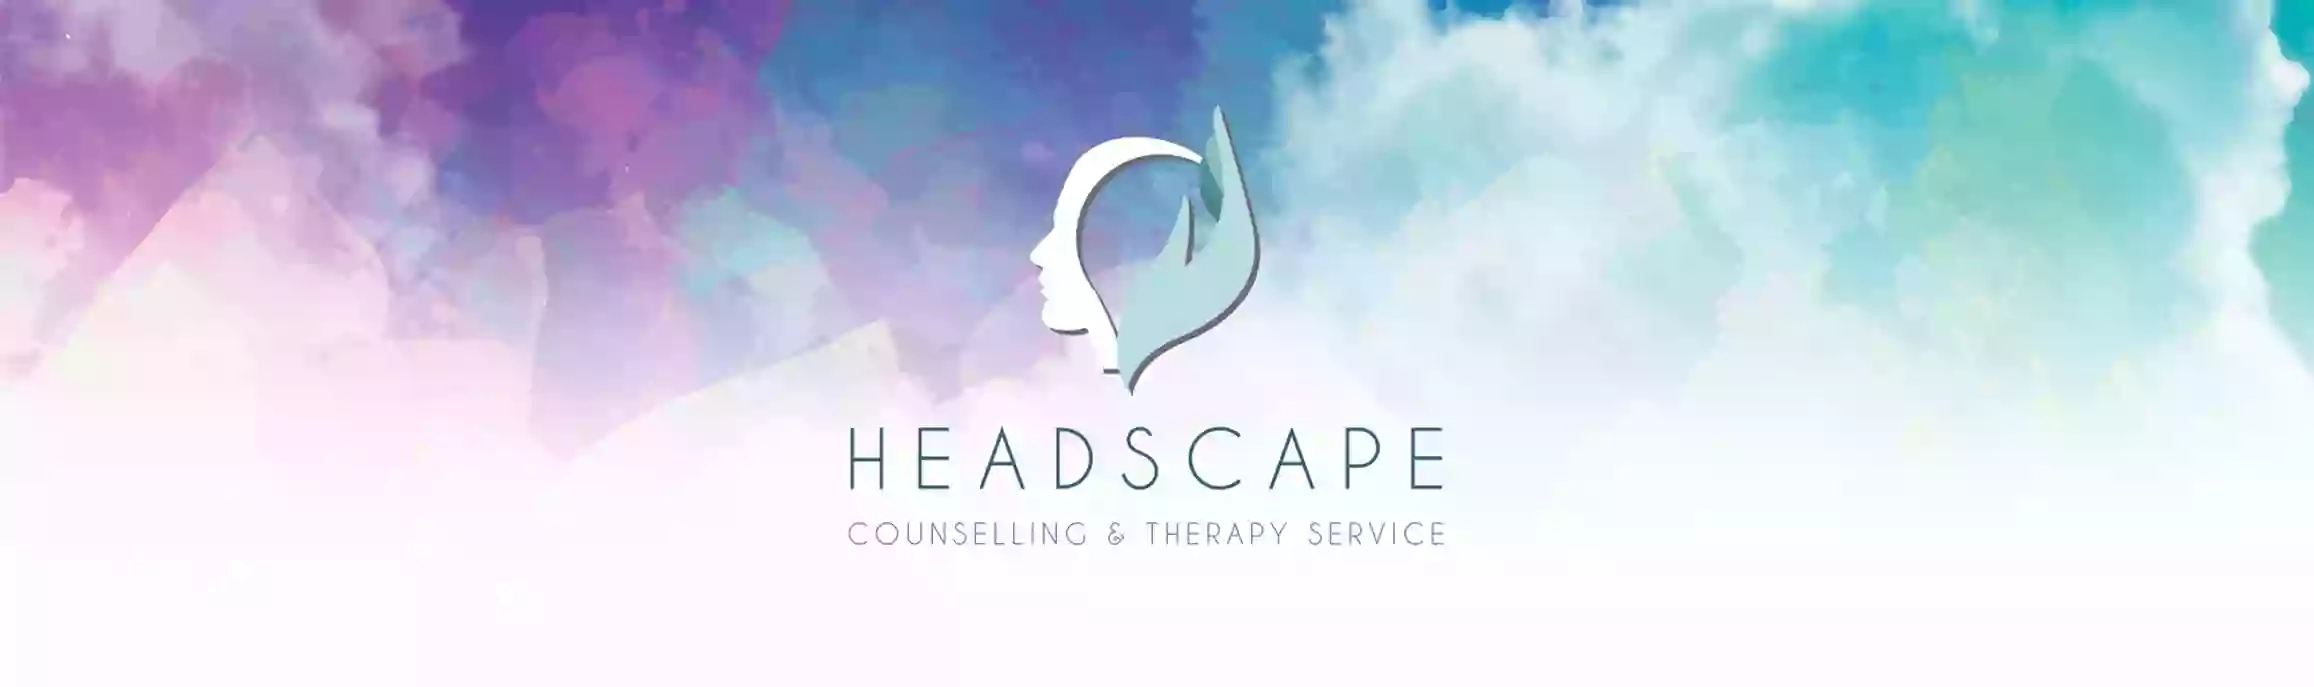 HeadScape Counselling and Therapy Service